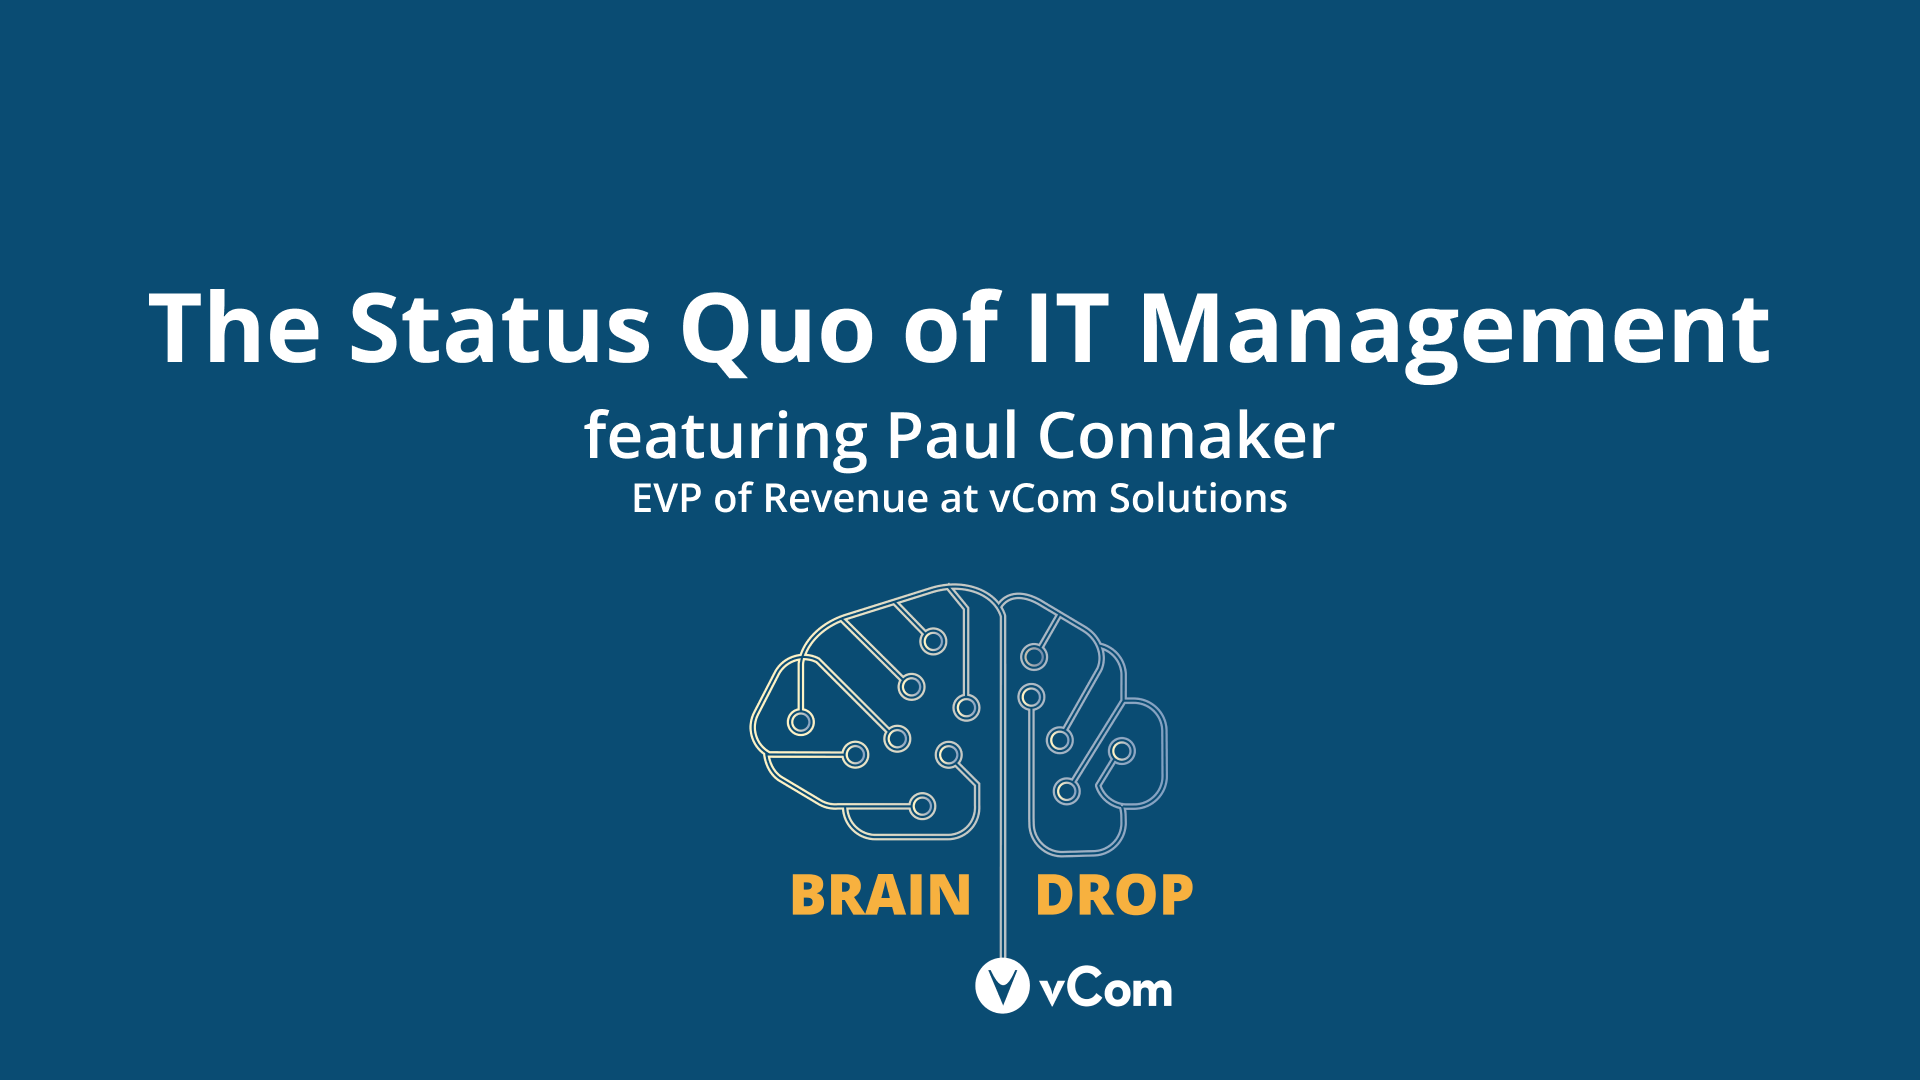 The Status Quo of IT Management with Paul Connaker